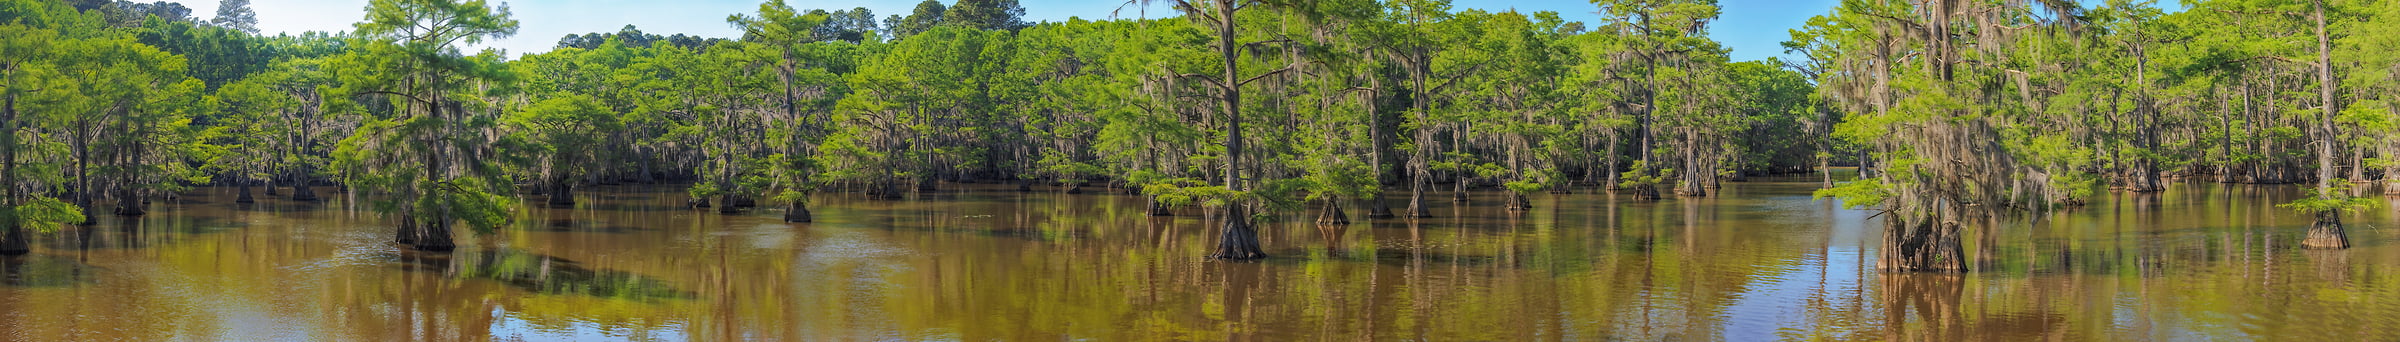 4,510 megapixels! A very high resolution, large-format VAST photo print of a swamp; panorama photograph created by John Freeman in Caddo Lake State Park, Karnack, Texas.